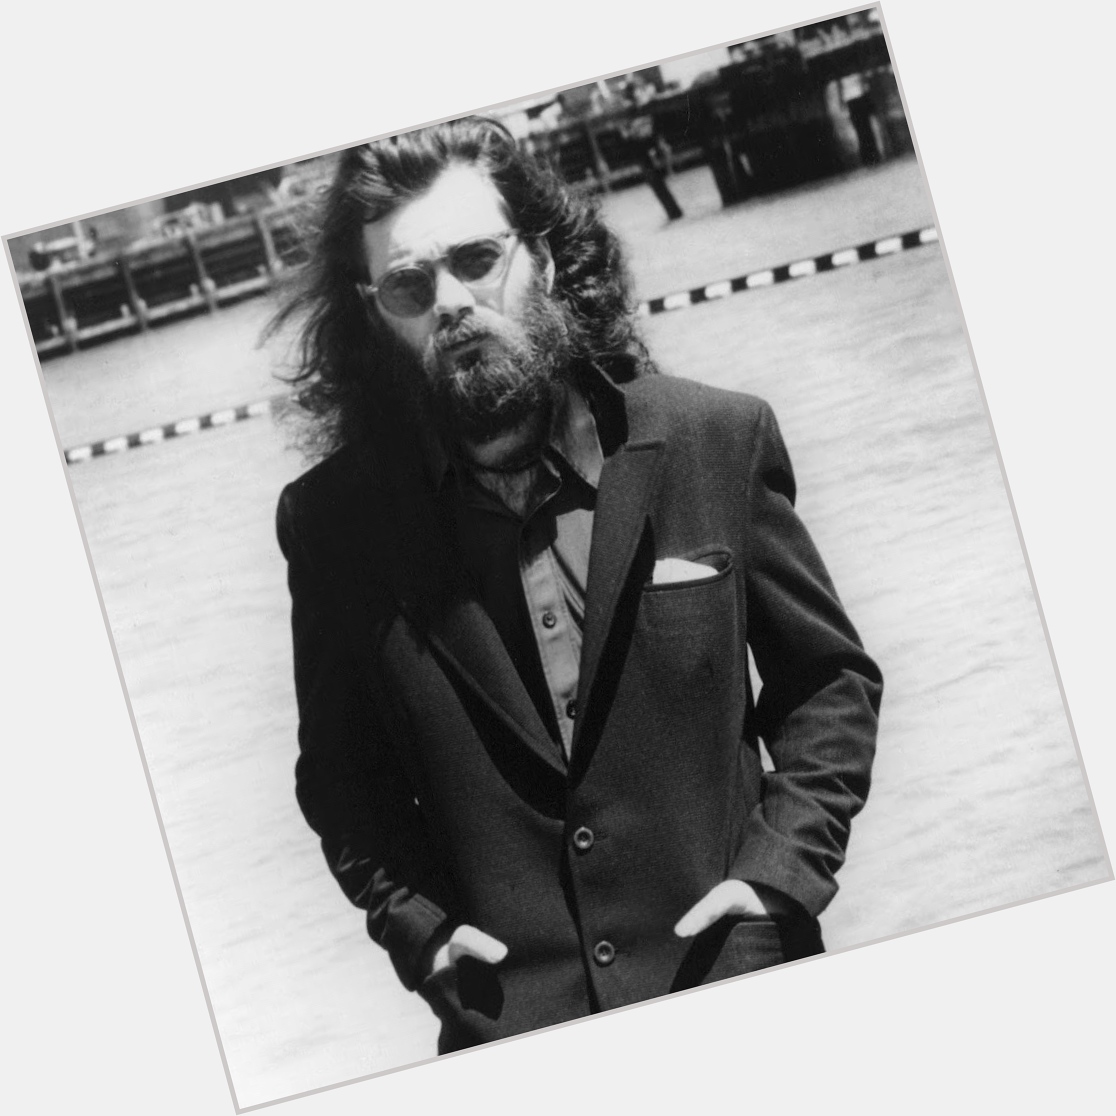 And Happy Birthday to the late, great Roky Erickson!  